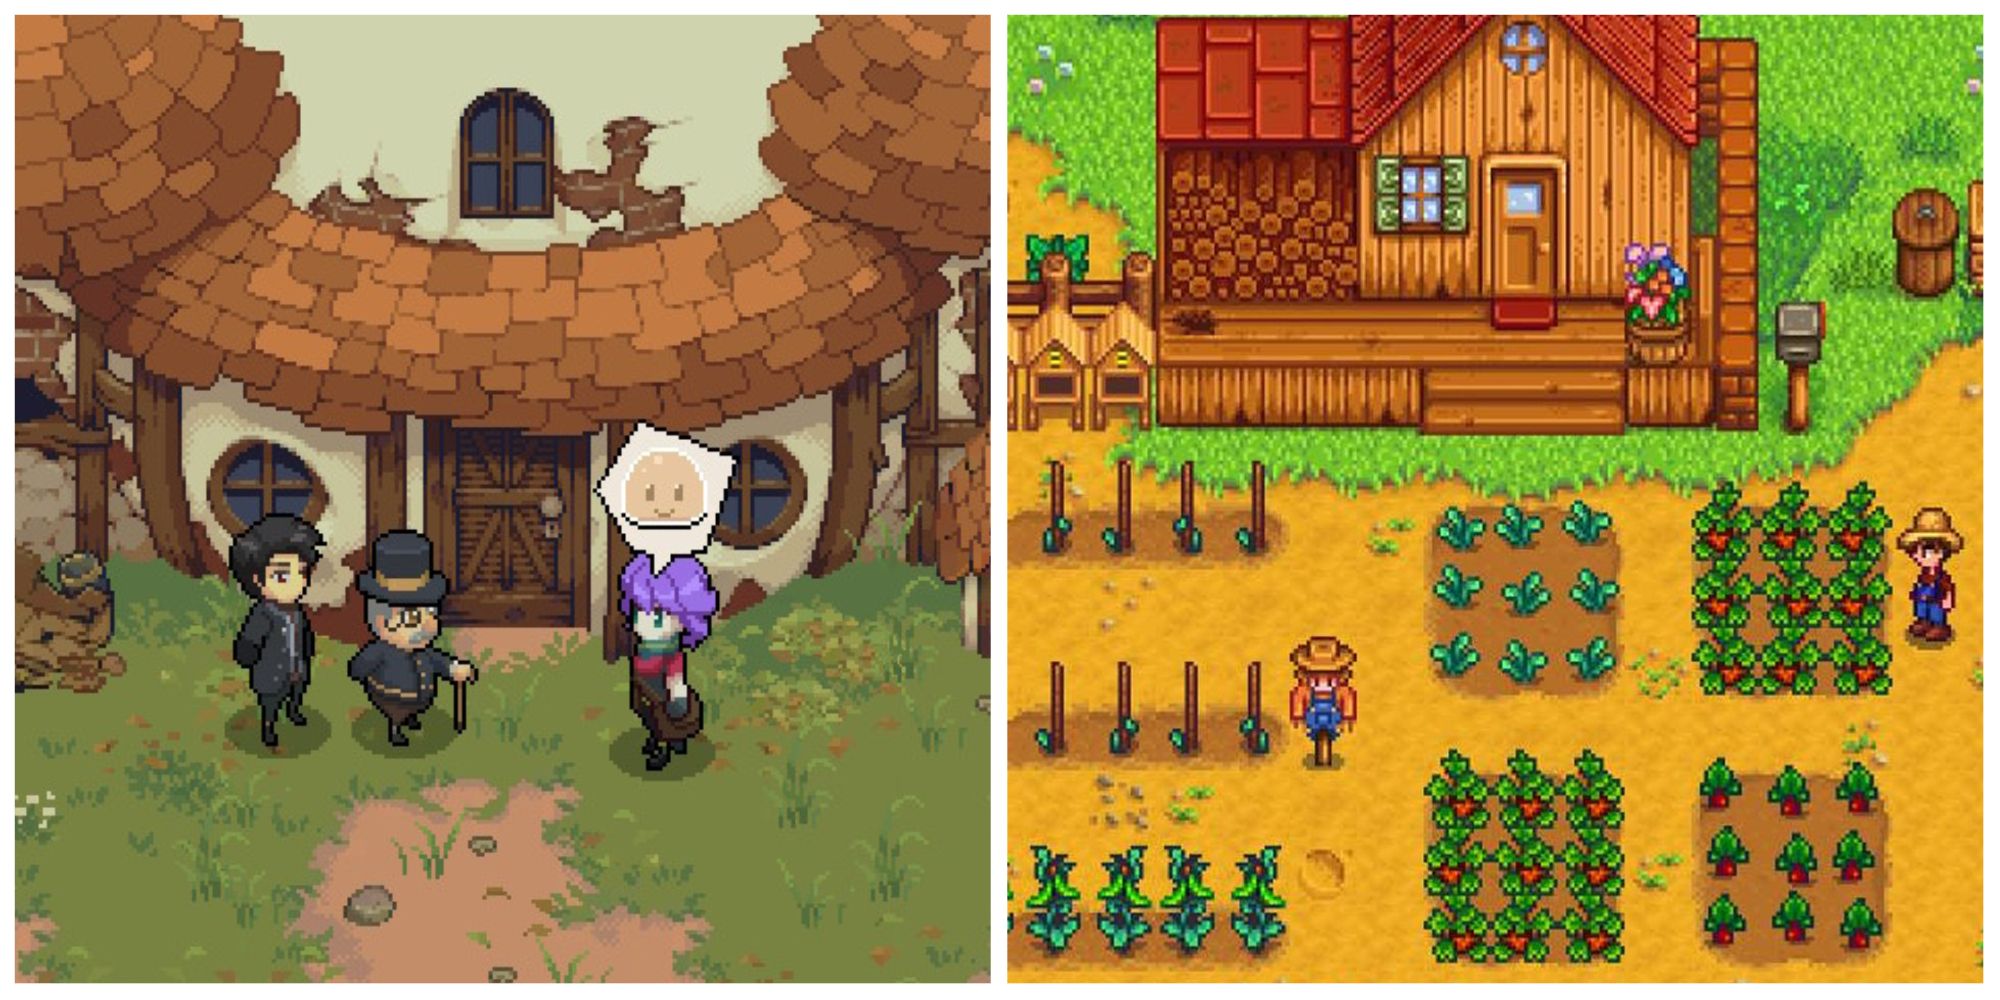 Potion Permit and Stardew Valley Collage